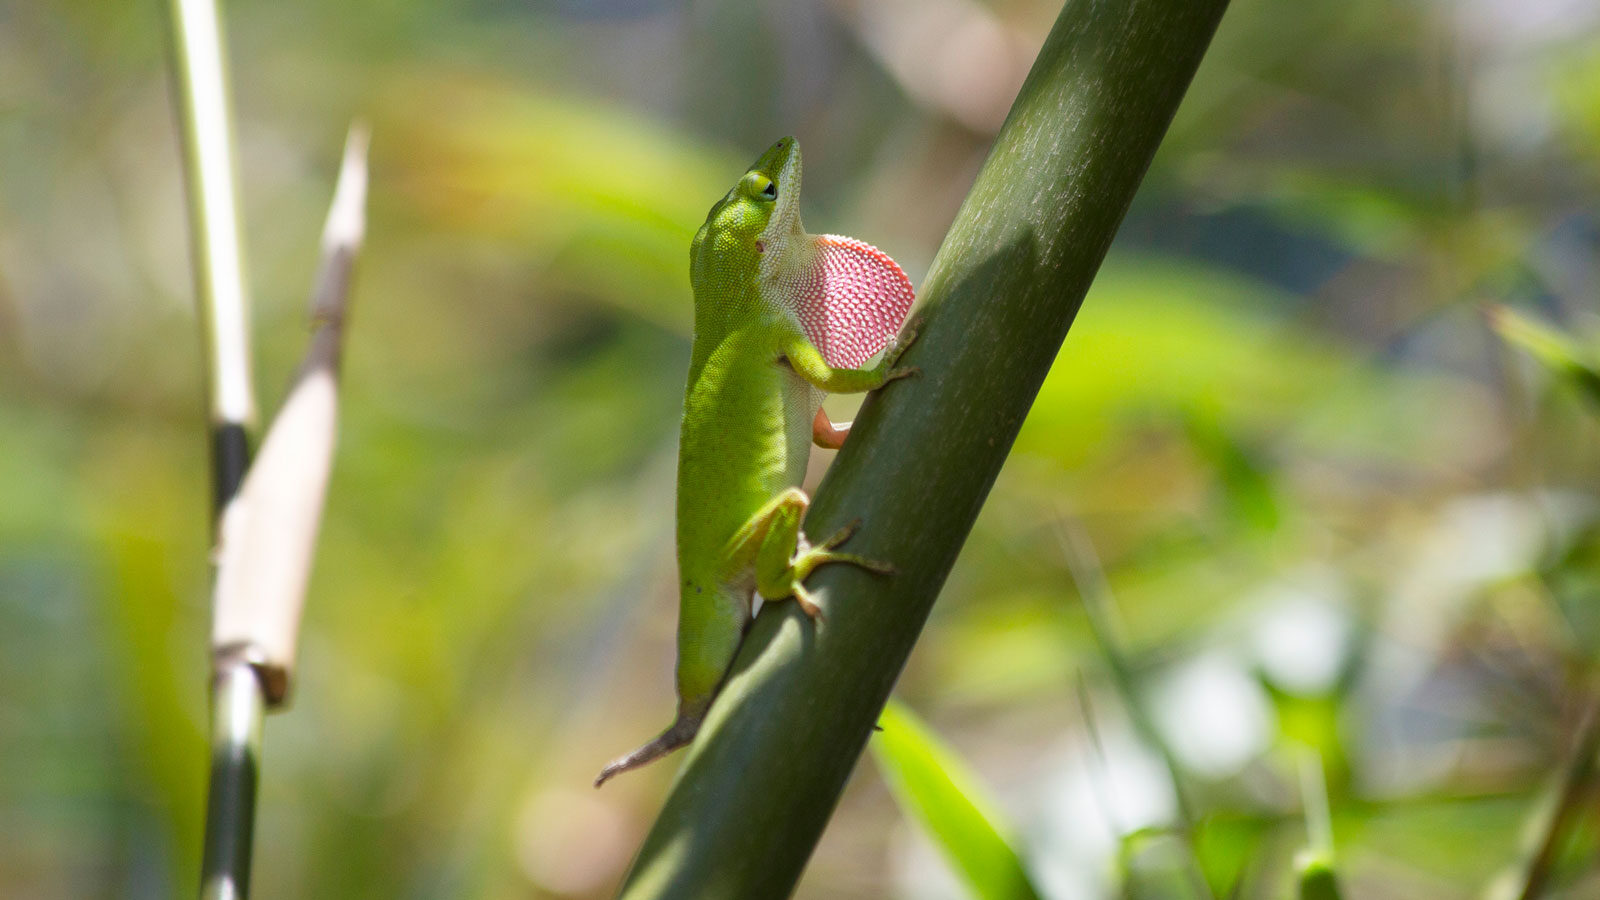 Green anole on a stem in a territorial display